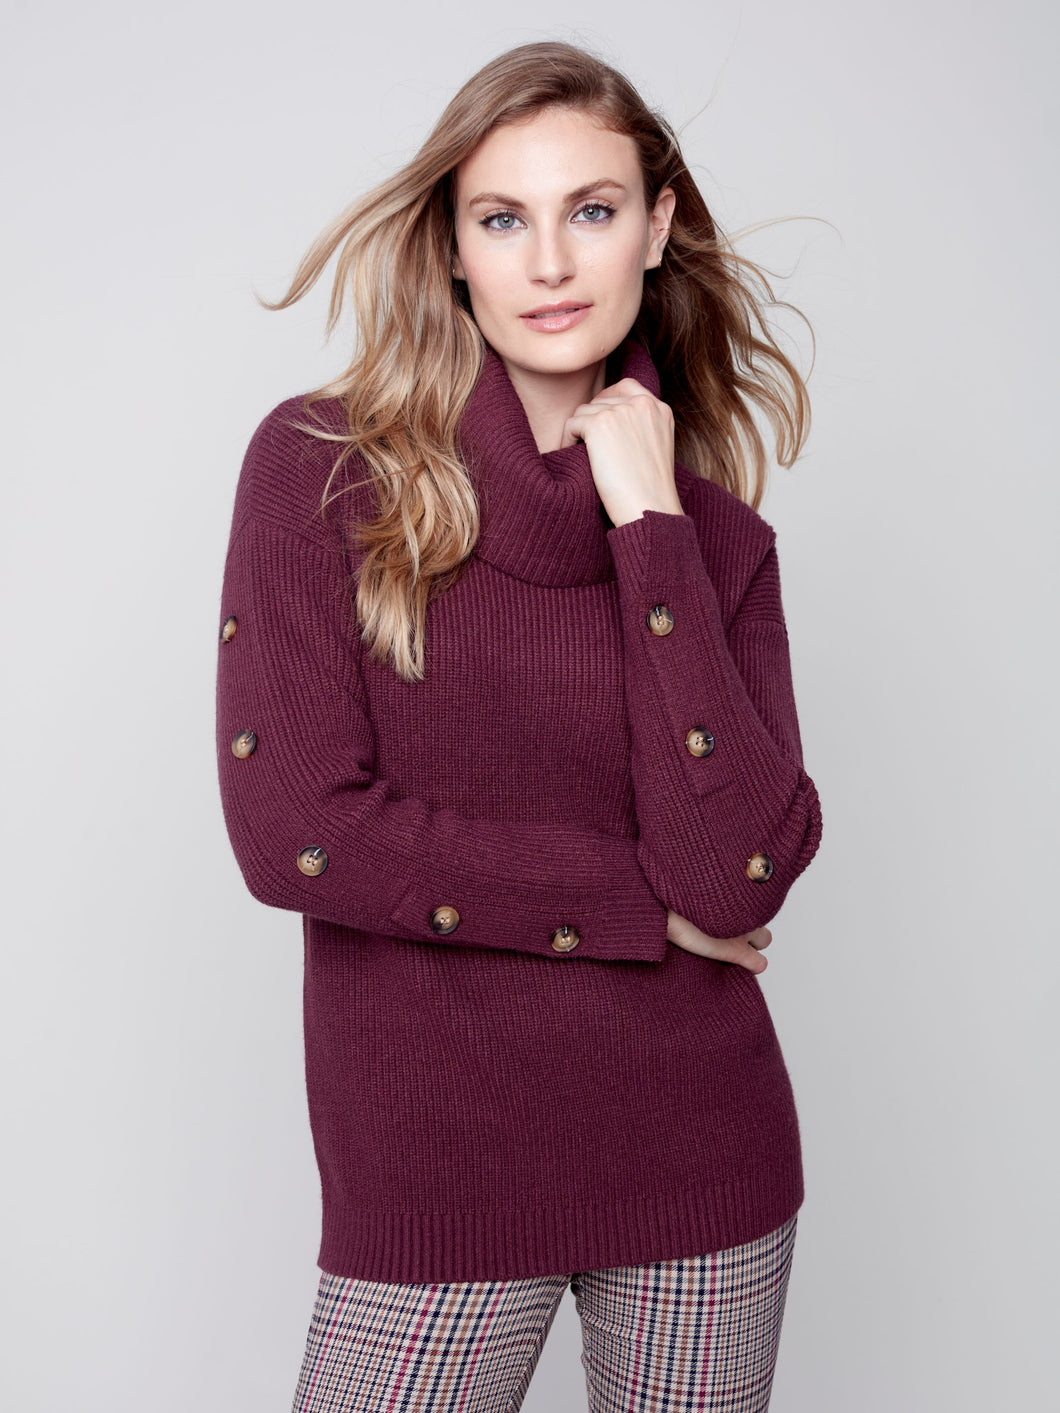 Charlie B Turtleneck Pullover Sweater with Sleeve Buttons in Ecru (Cream) or Port